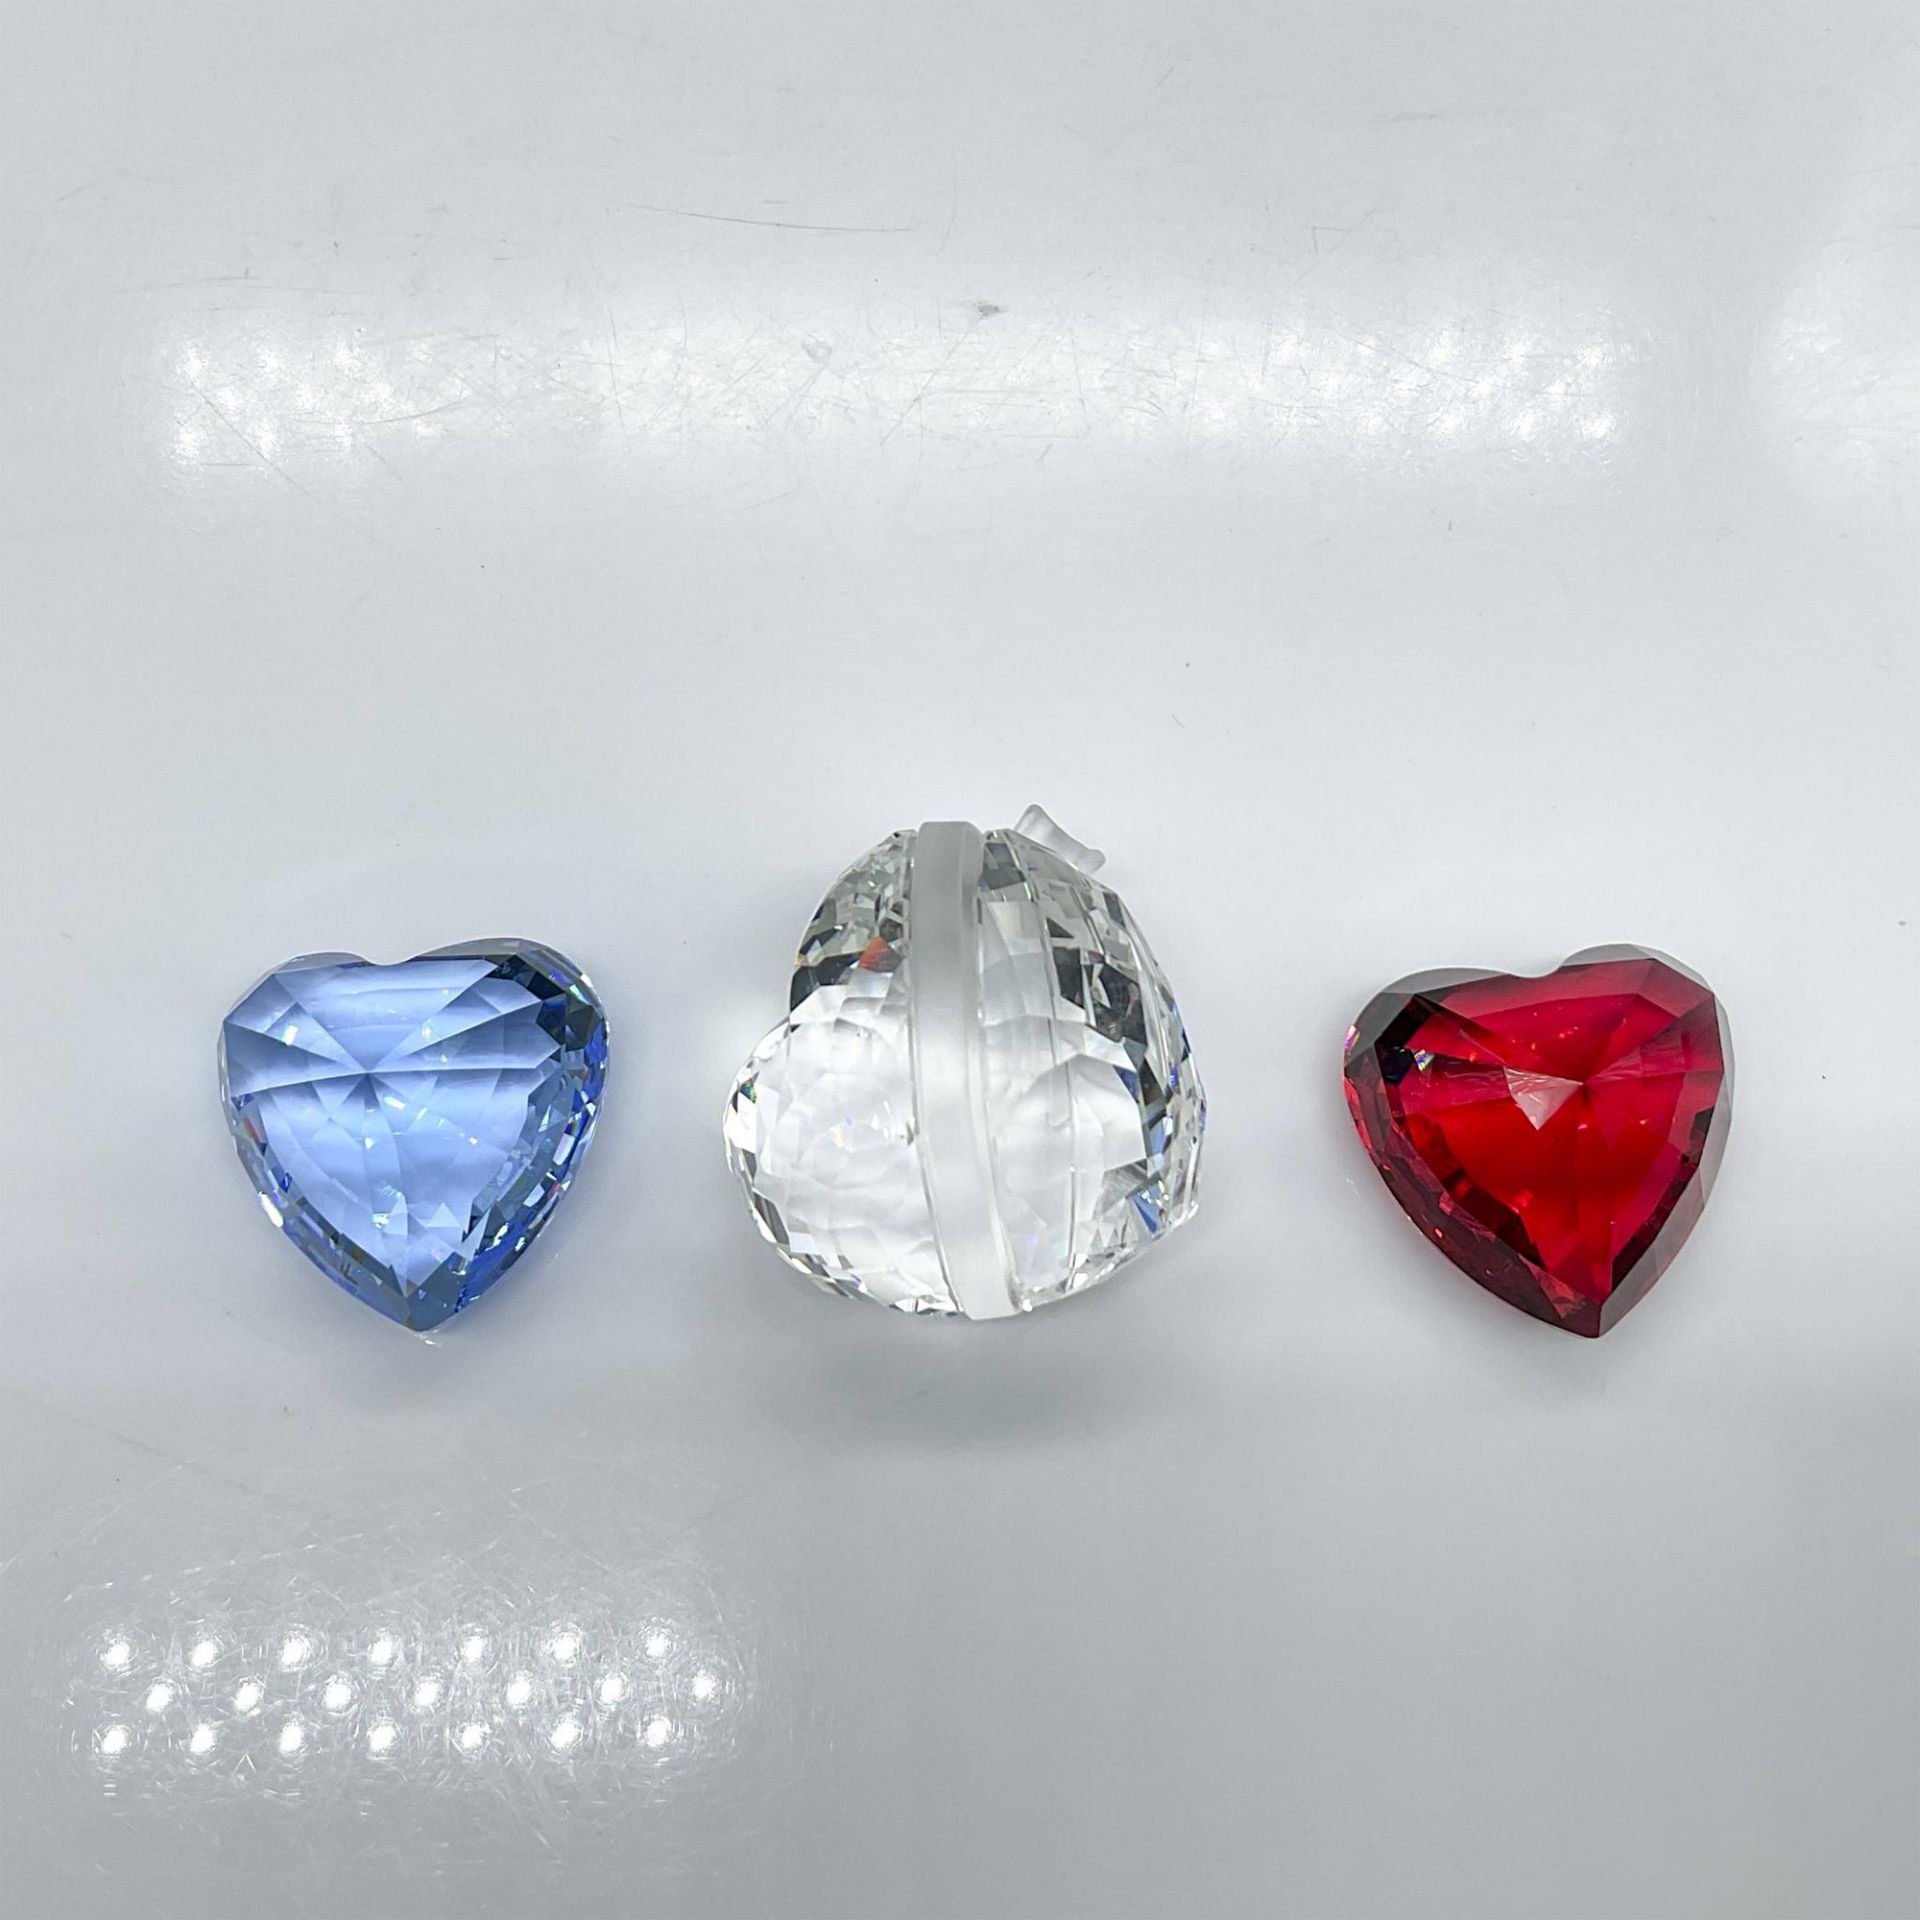 3pc Swarovski Crystal Heart Paperweights - Image 2 of 2